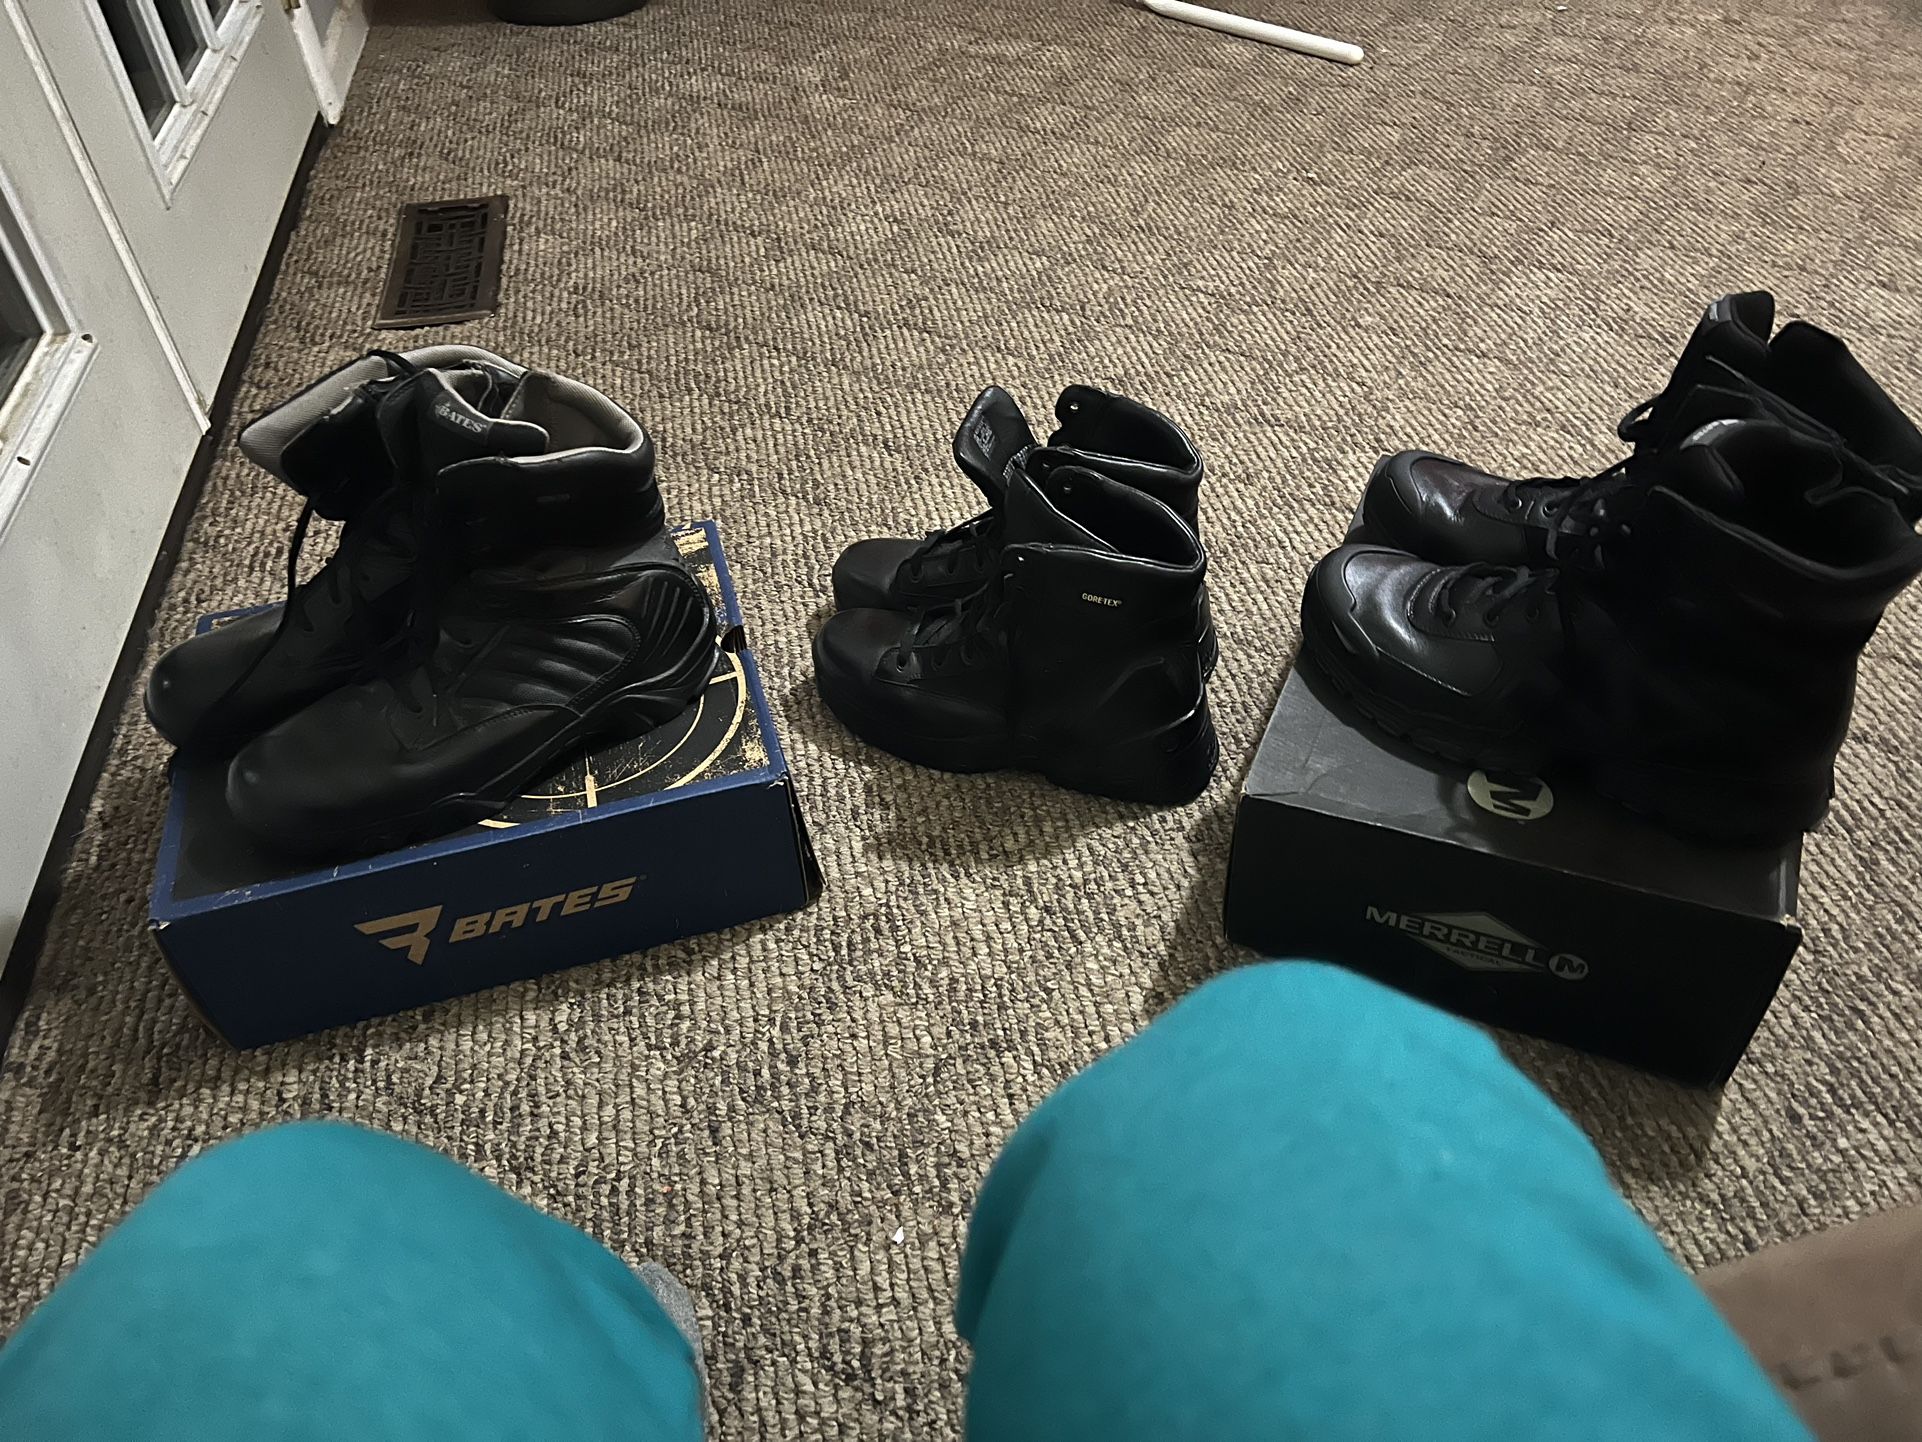 Police/military Combat Boots- 3 Pairs - $125 For All